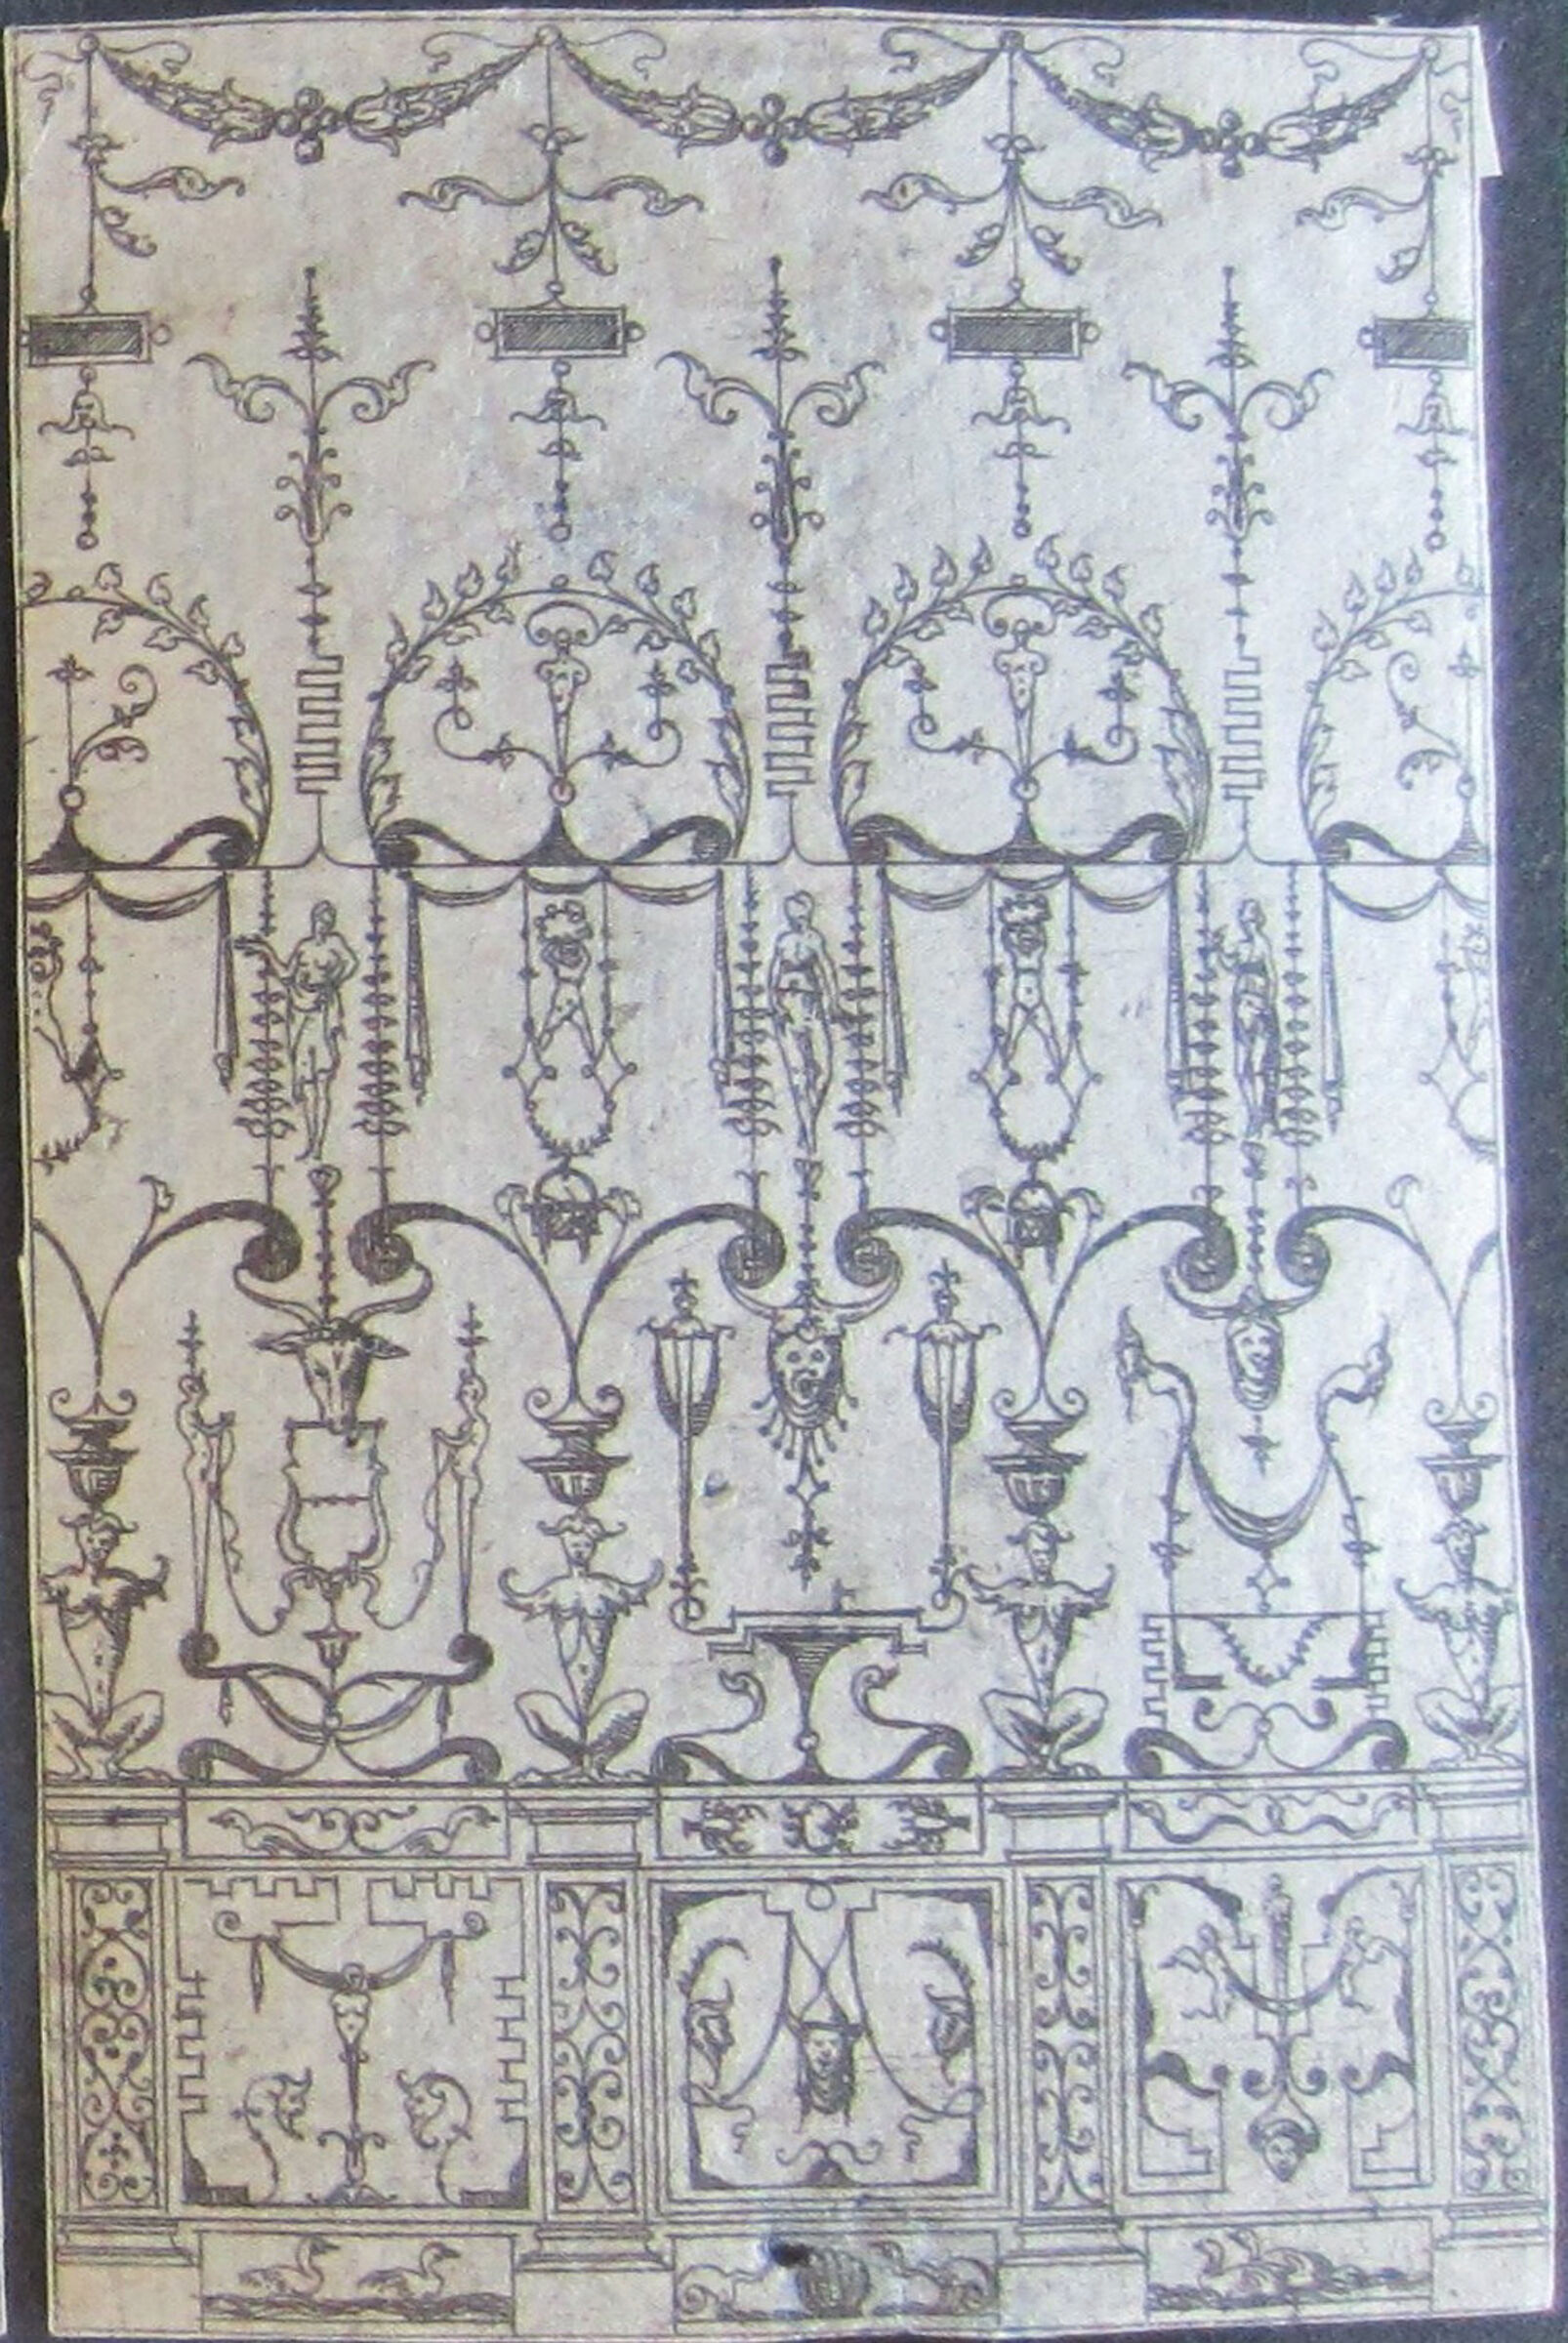 Grotesque With Bands Of Repeating Elements, Including Two Friezes With Swans At The Lowest Level